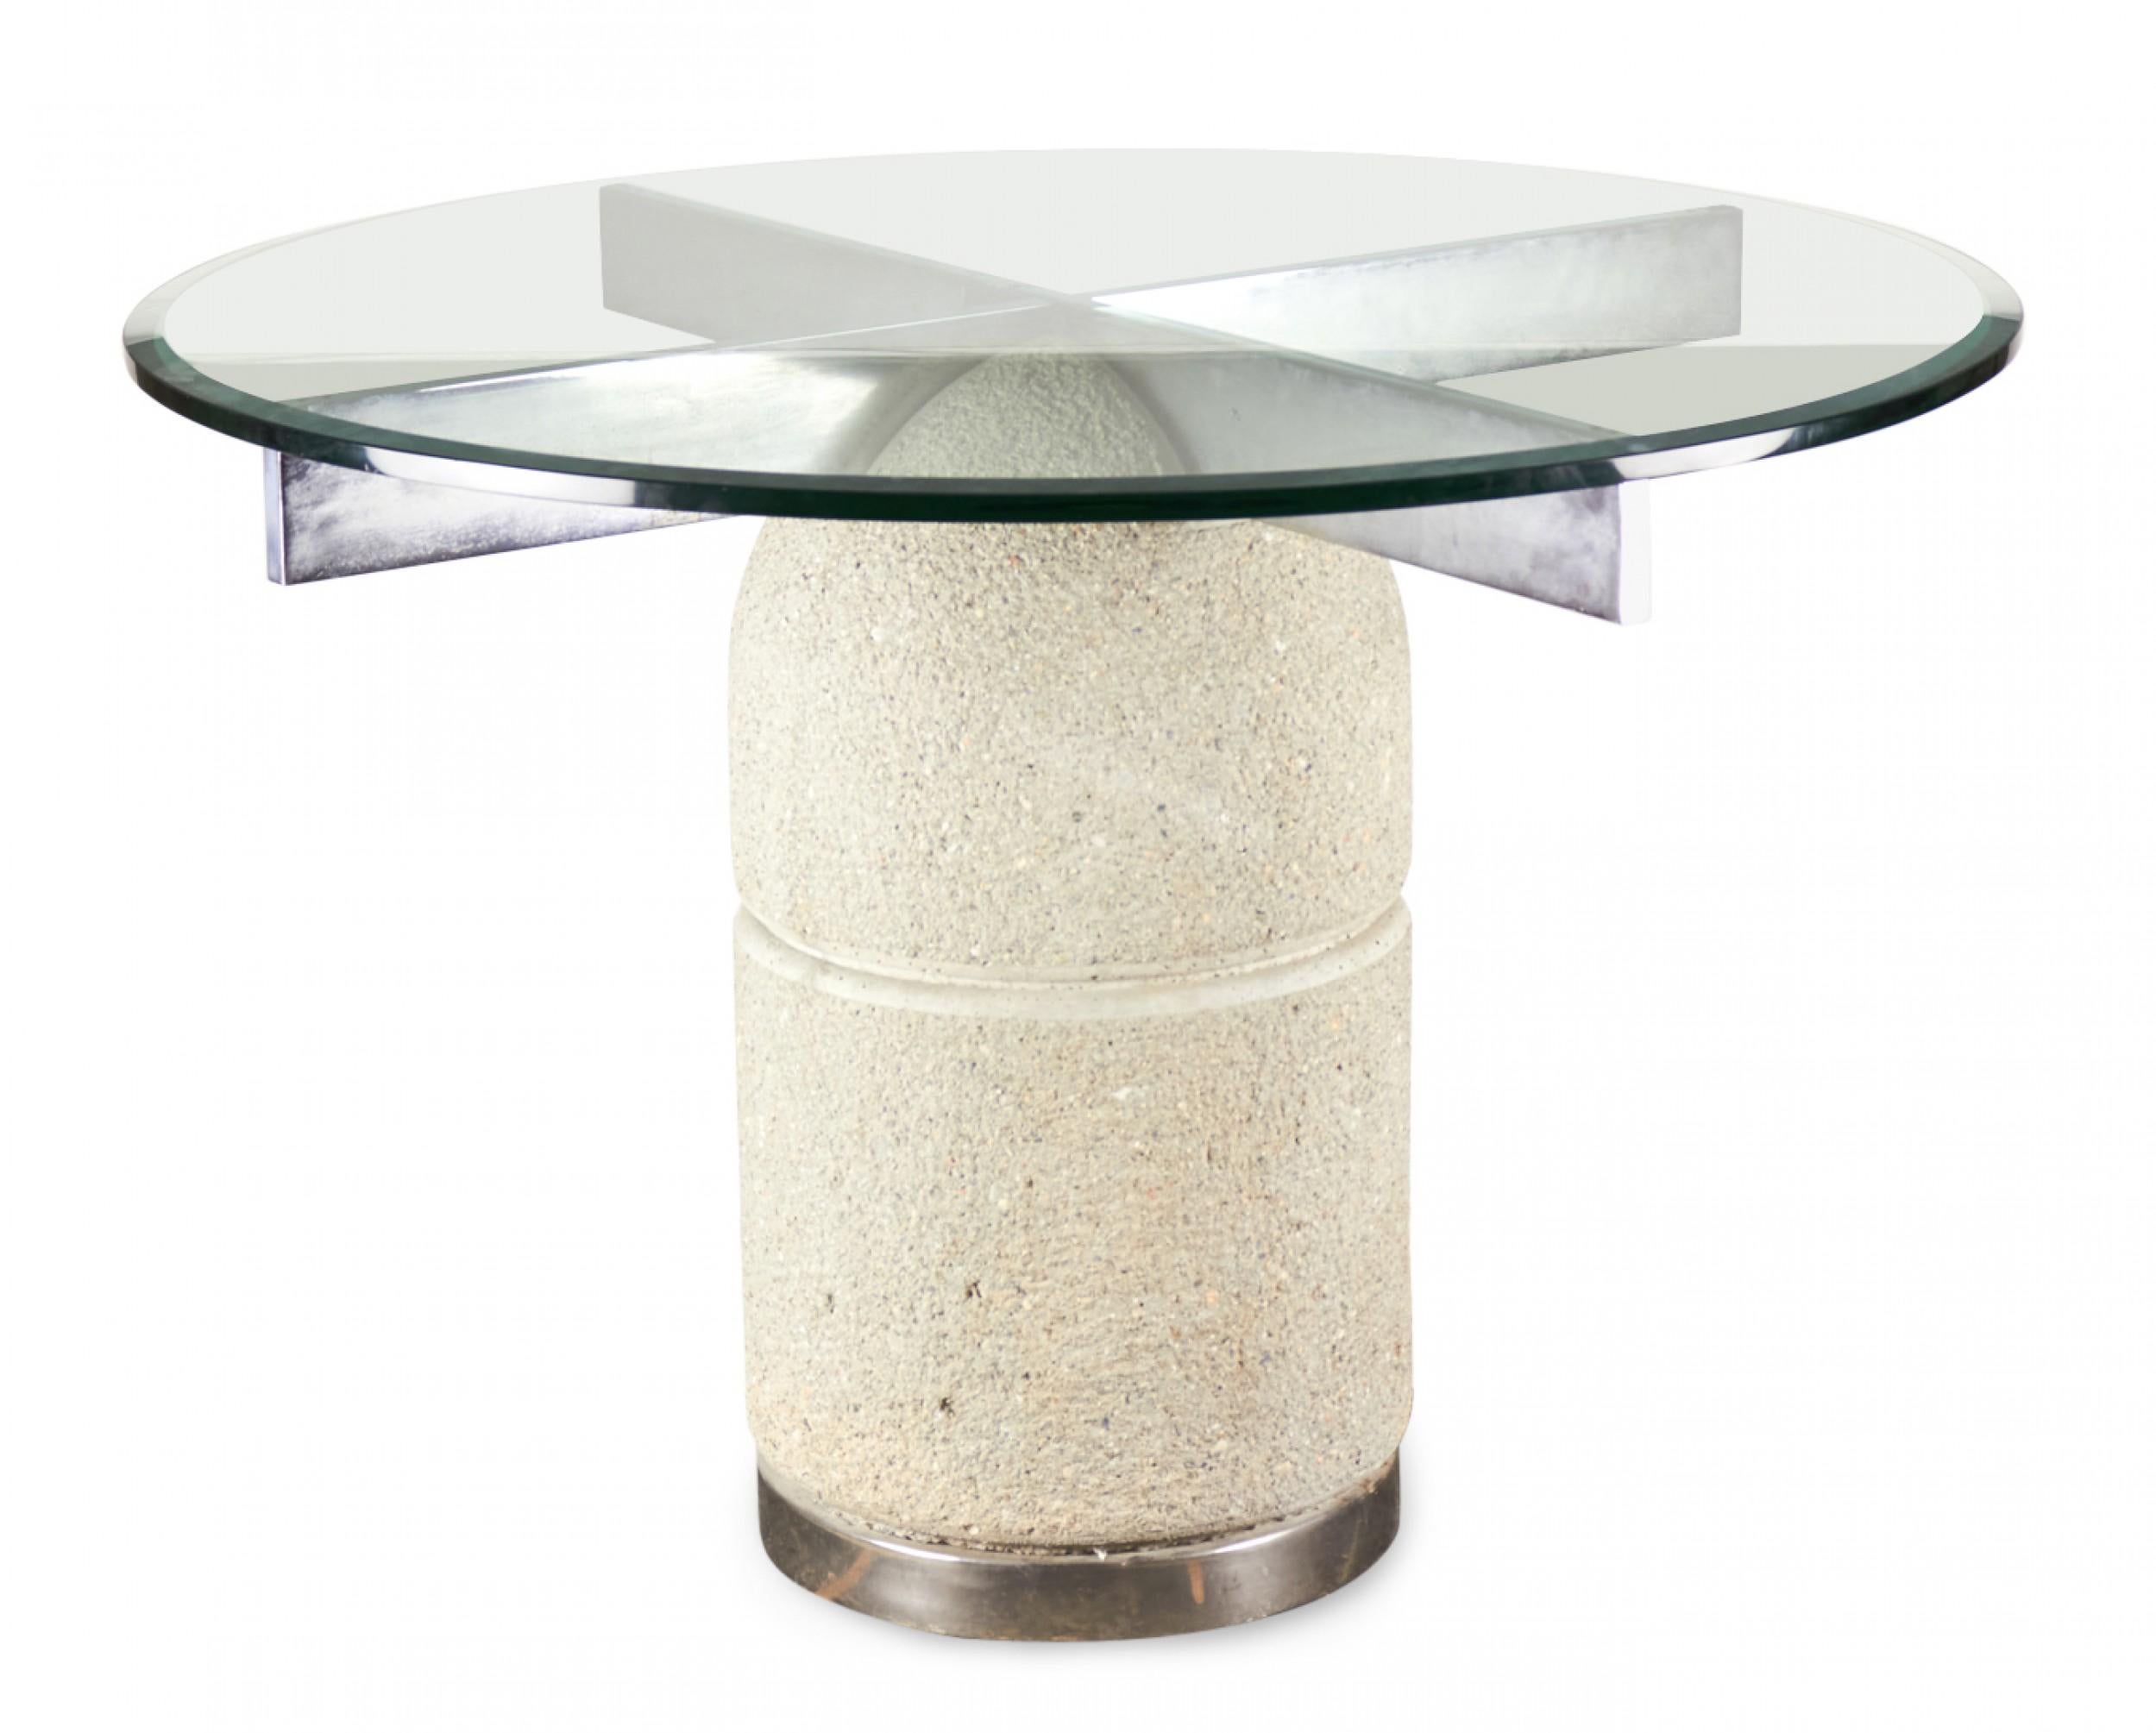 Giovanni Offredi for Saporiti Italian Texture Concrete and Glass Dining Table In Good Condition For Sale In New York, NY